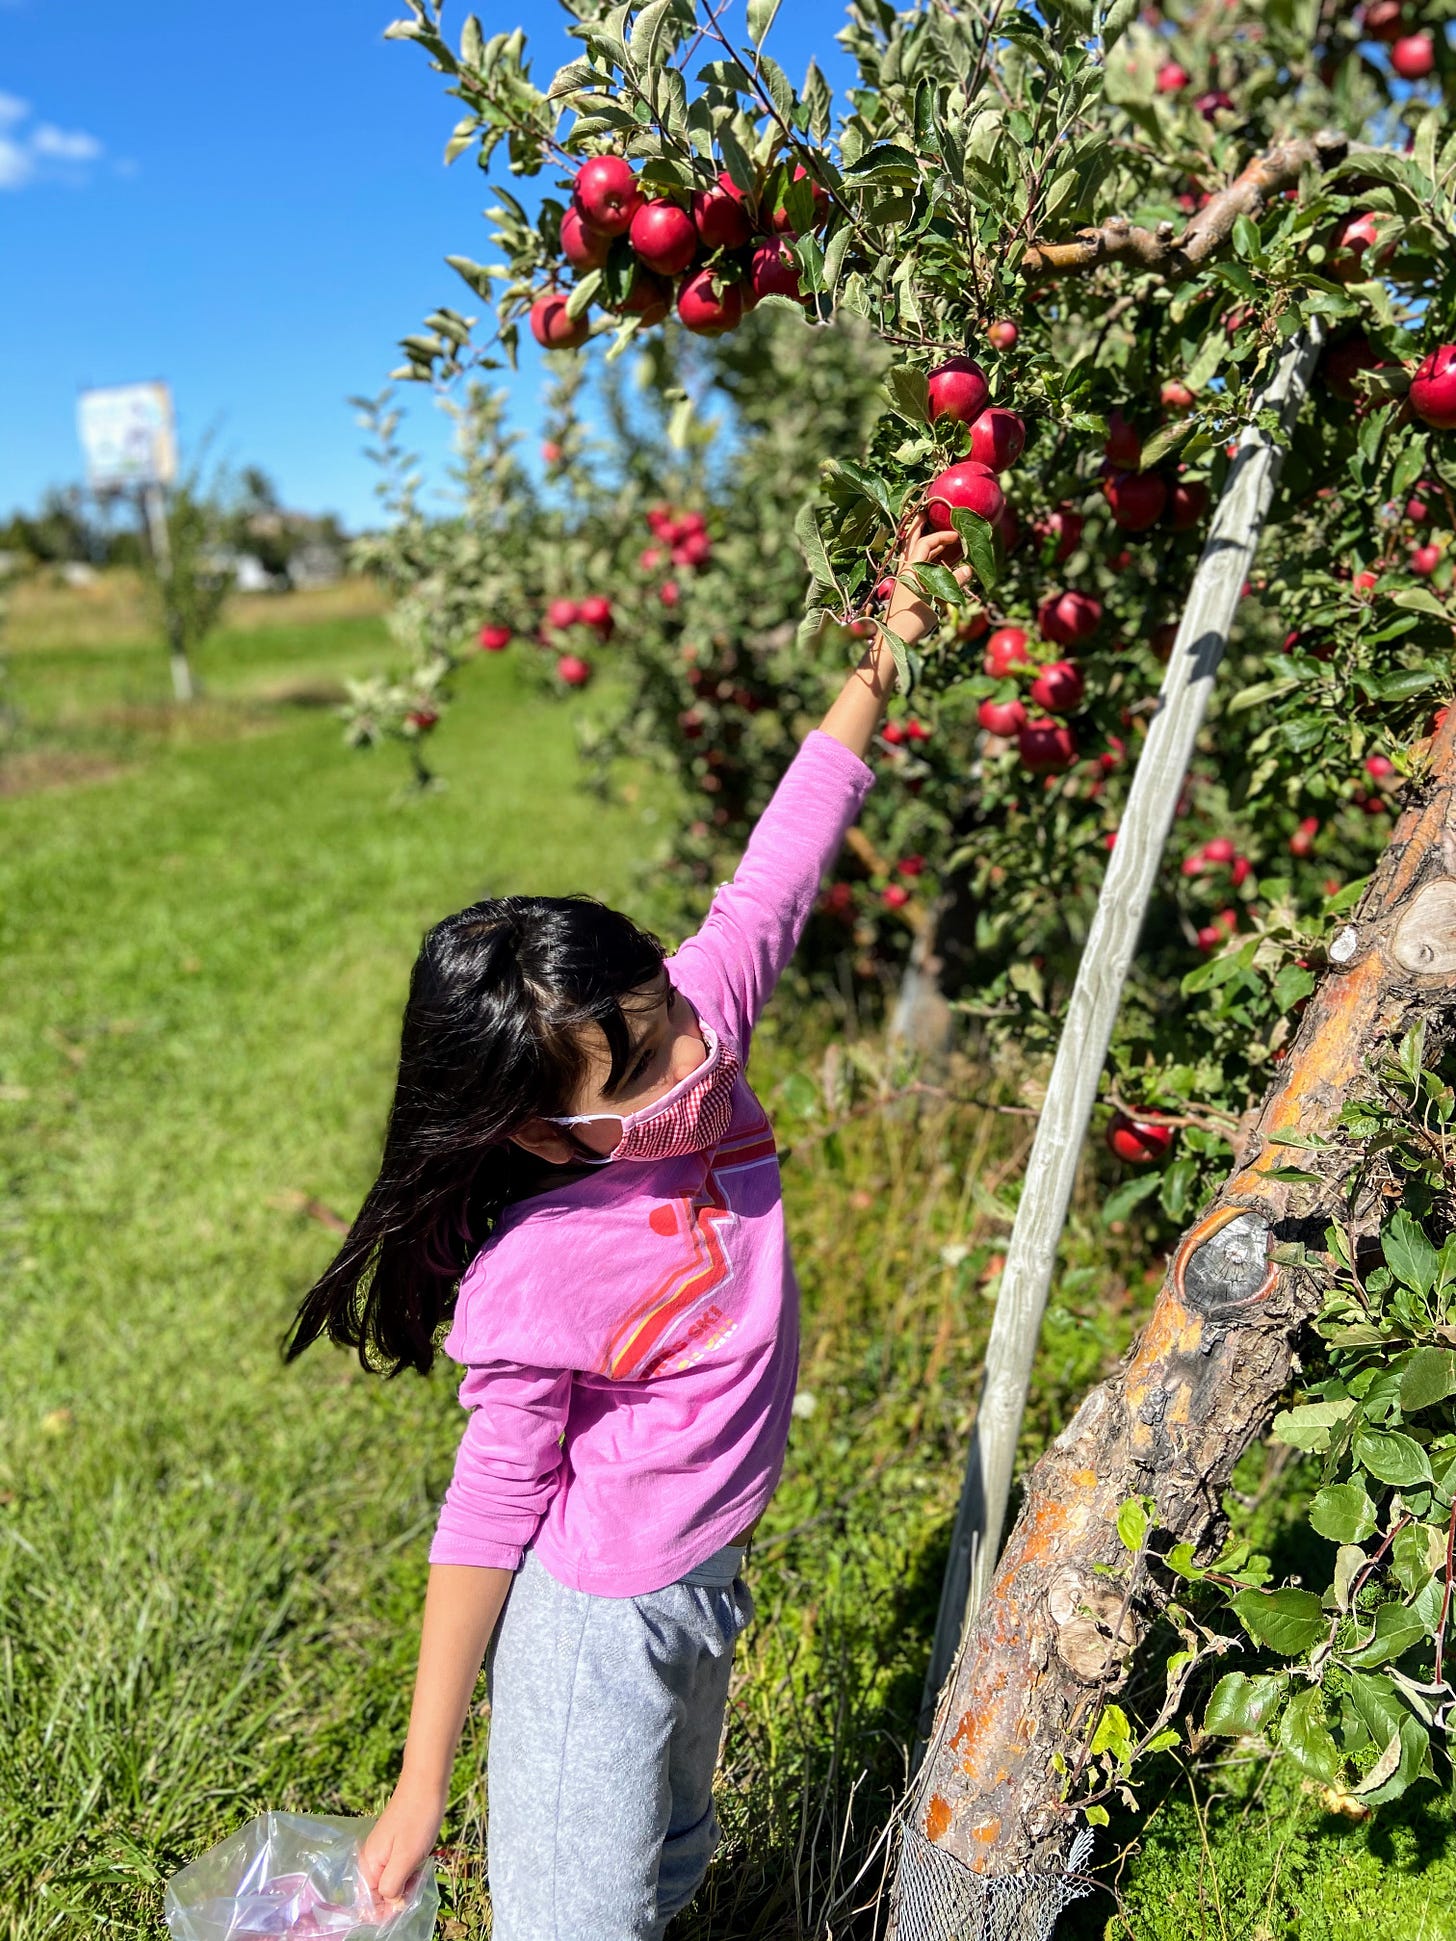 Girl picking apples from tree